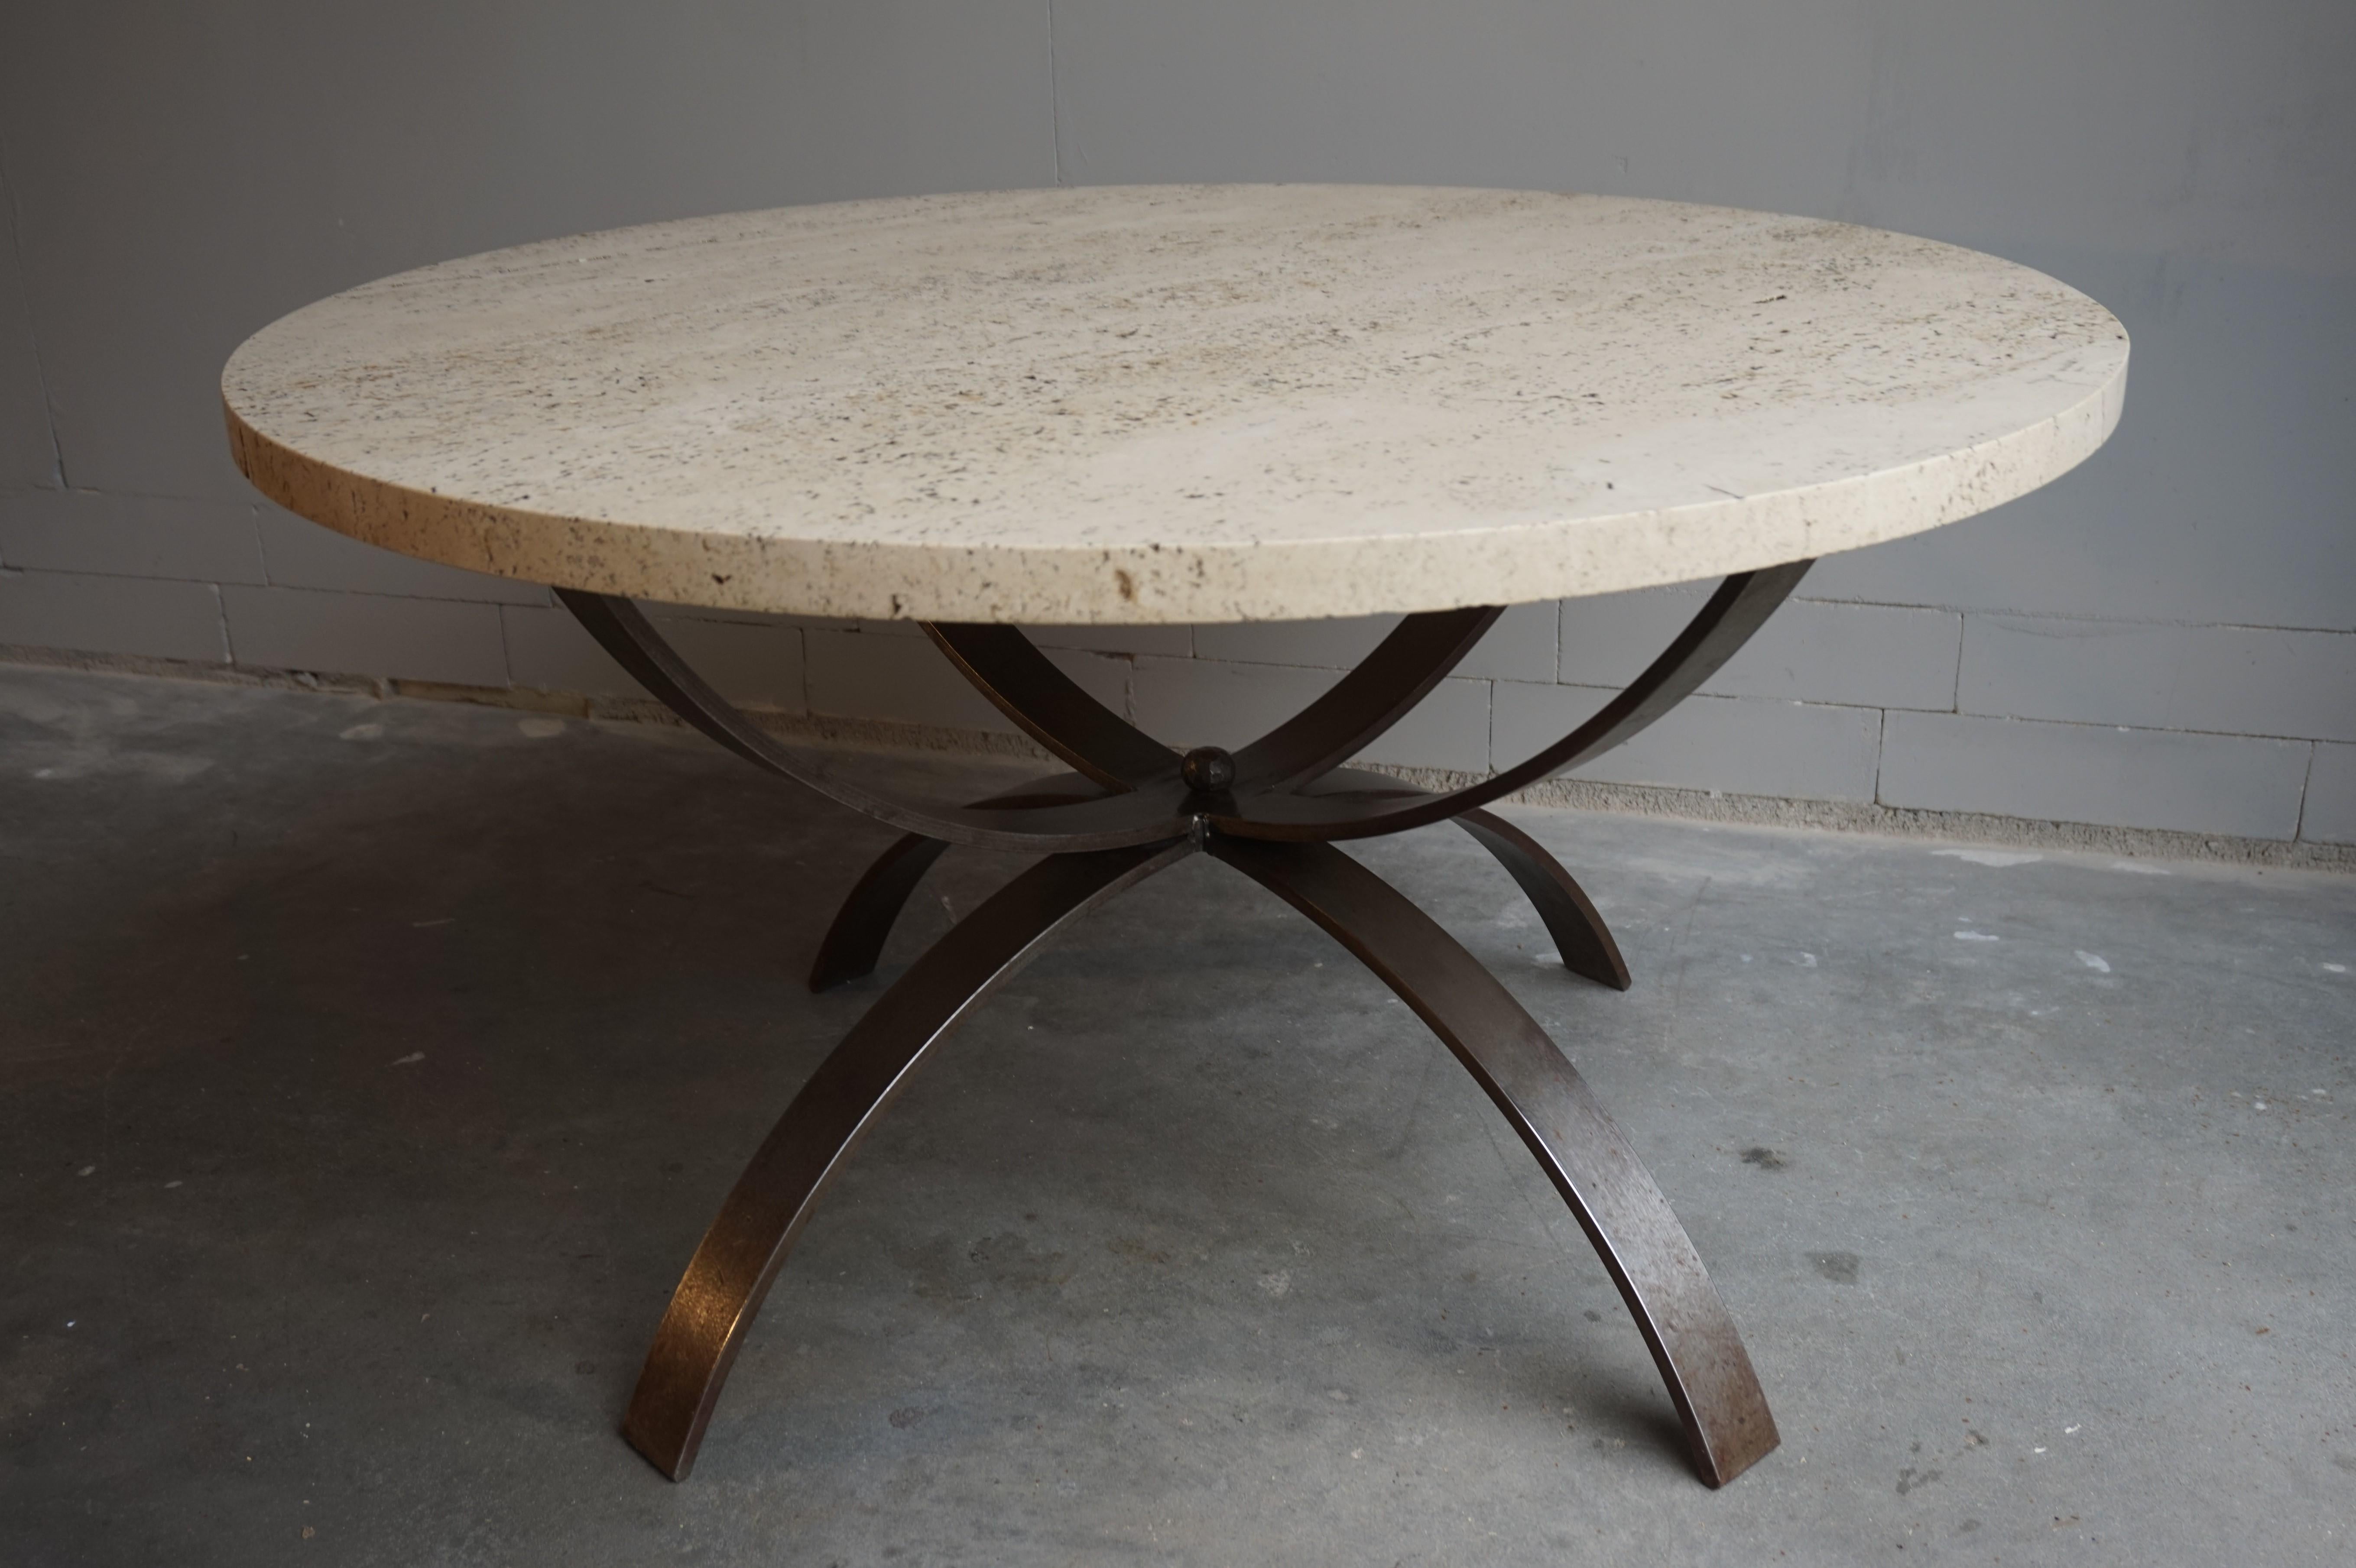 Handcrafted and very stylish midcentury coffee table.

All handcrafted out of natural materials only this good size coffee table will look fabulous in all kinds of living spaces. Its timeless design and neutral coloring also makes it suitable for